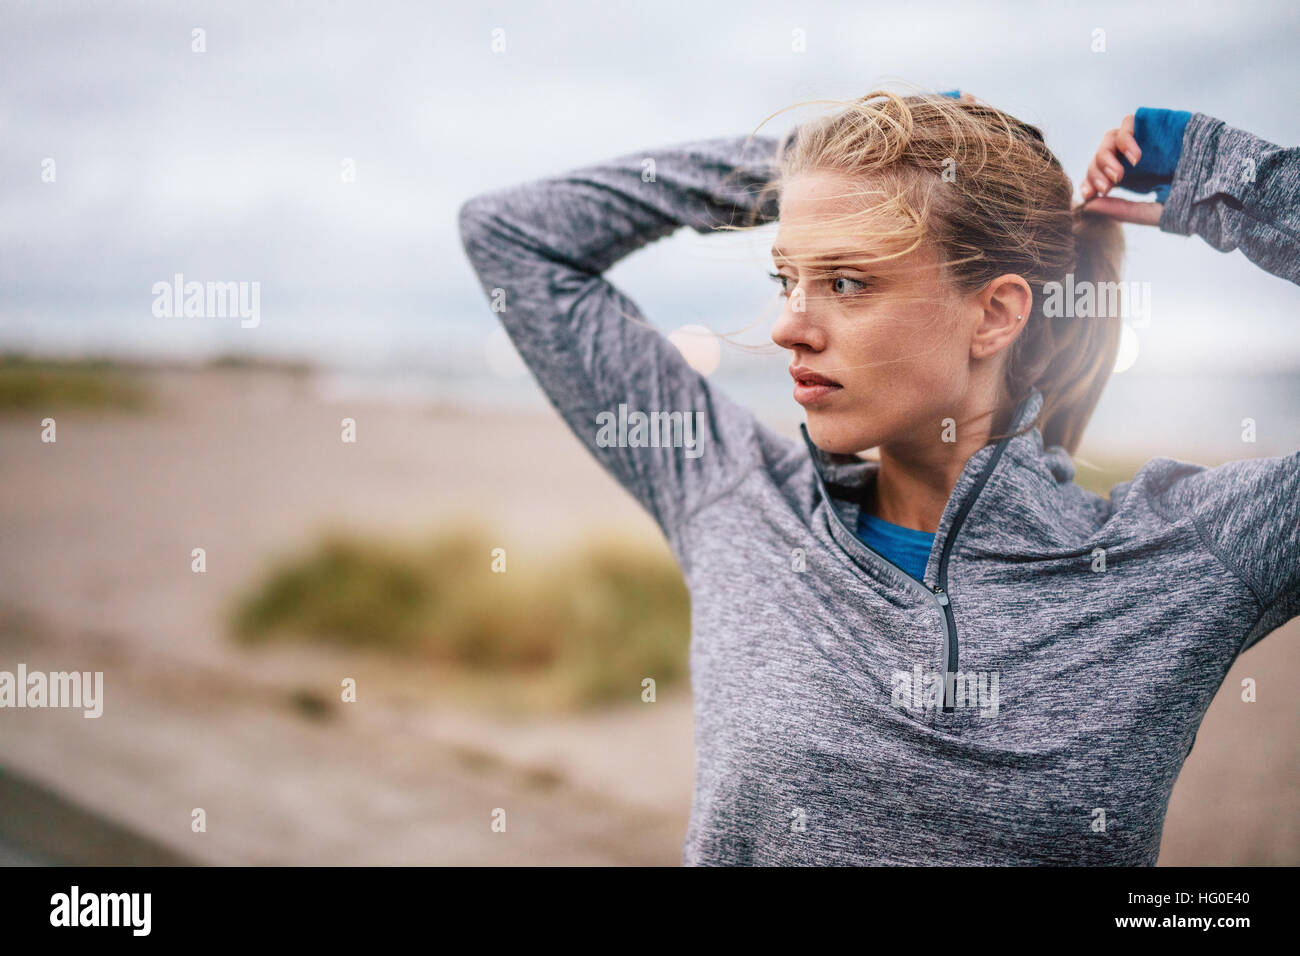 Close up of young female runner tying up hair before a run. Sporty fitness woman on outdoor workout looking away. Stock Photo